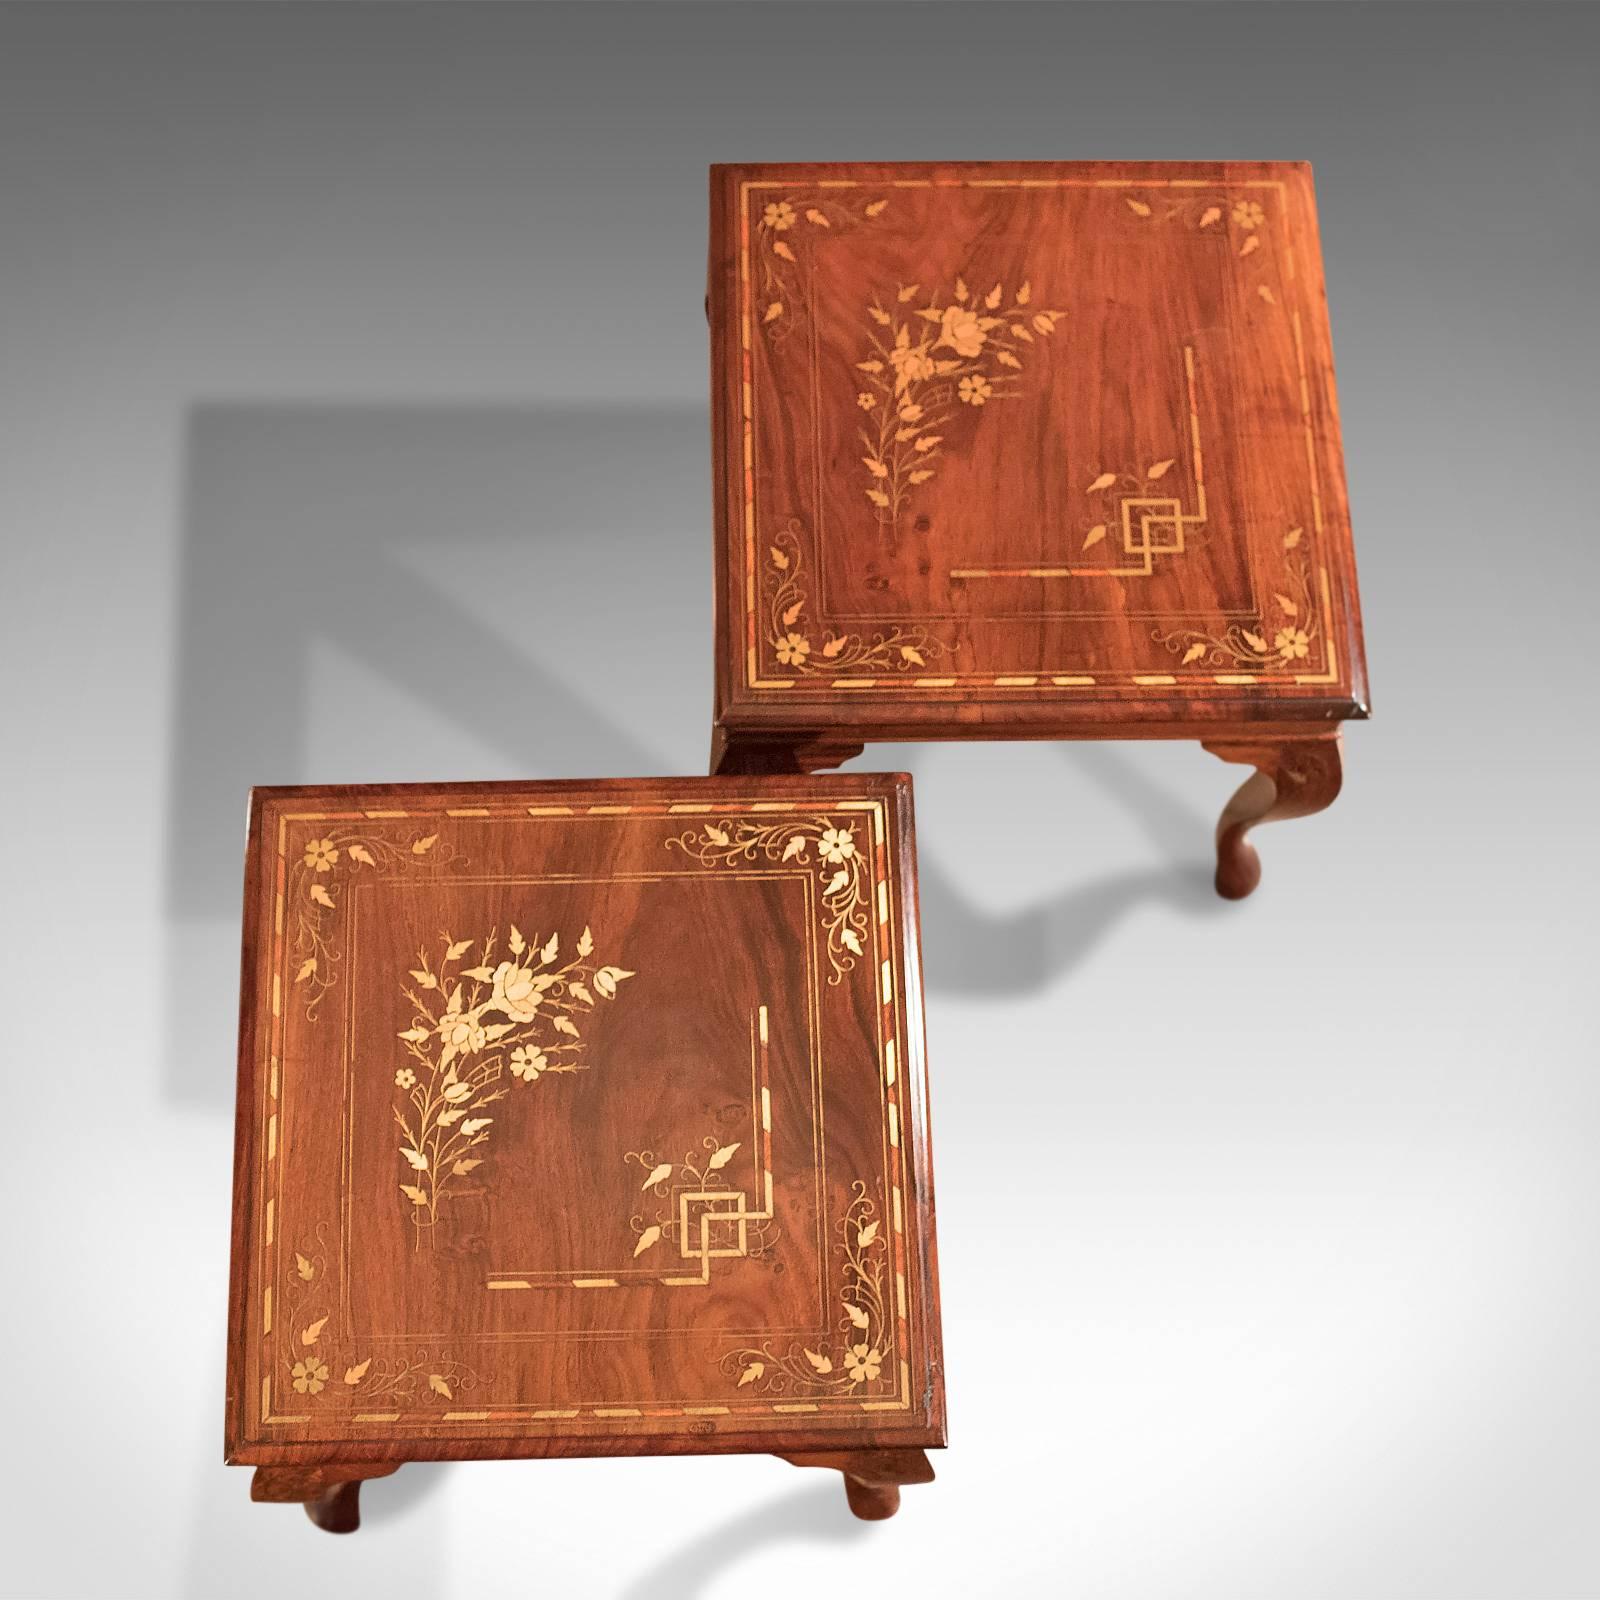 An attractive pair of side tables from the mid to late 20th century.

Crafted in choice cuts of Asian walnut
Stunning grain detail in the lustrous finish
Raised on cabriole legs with foliate brass inlay to knee
Frieze in good proportion with